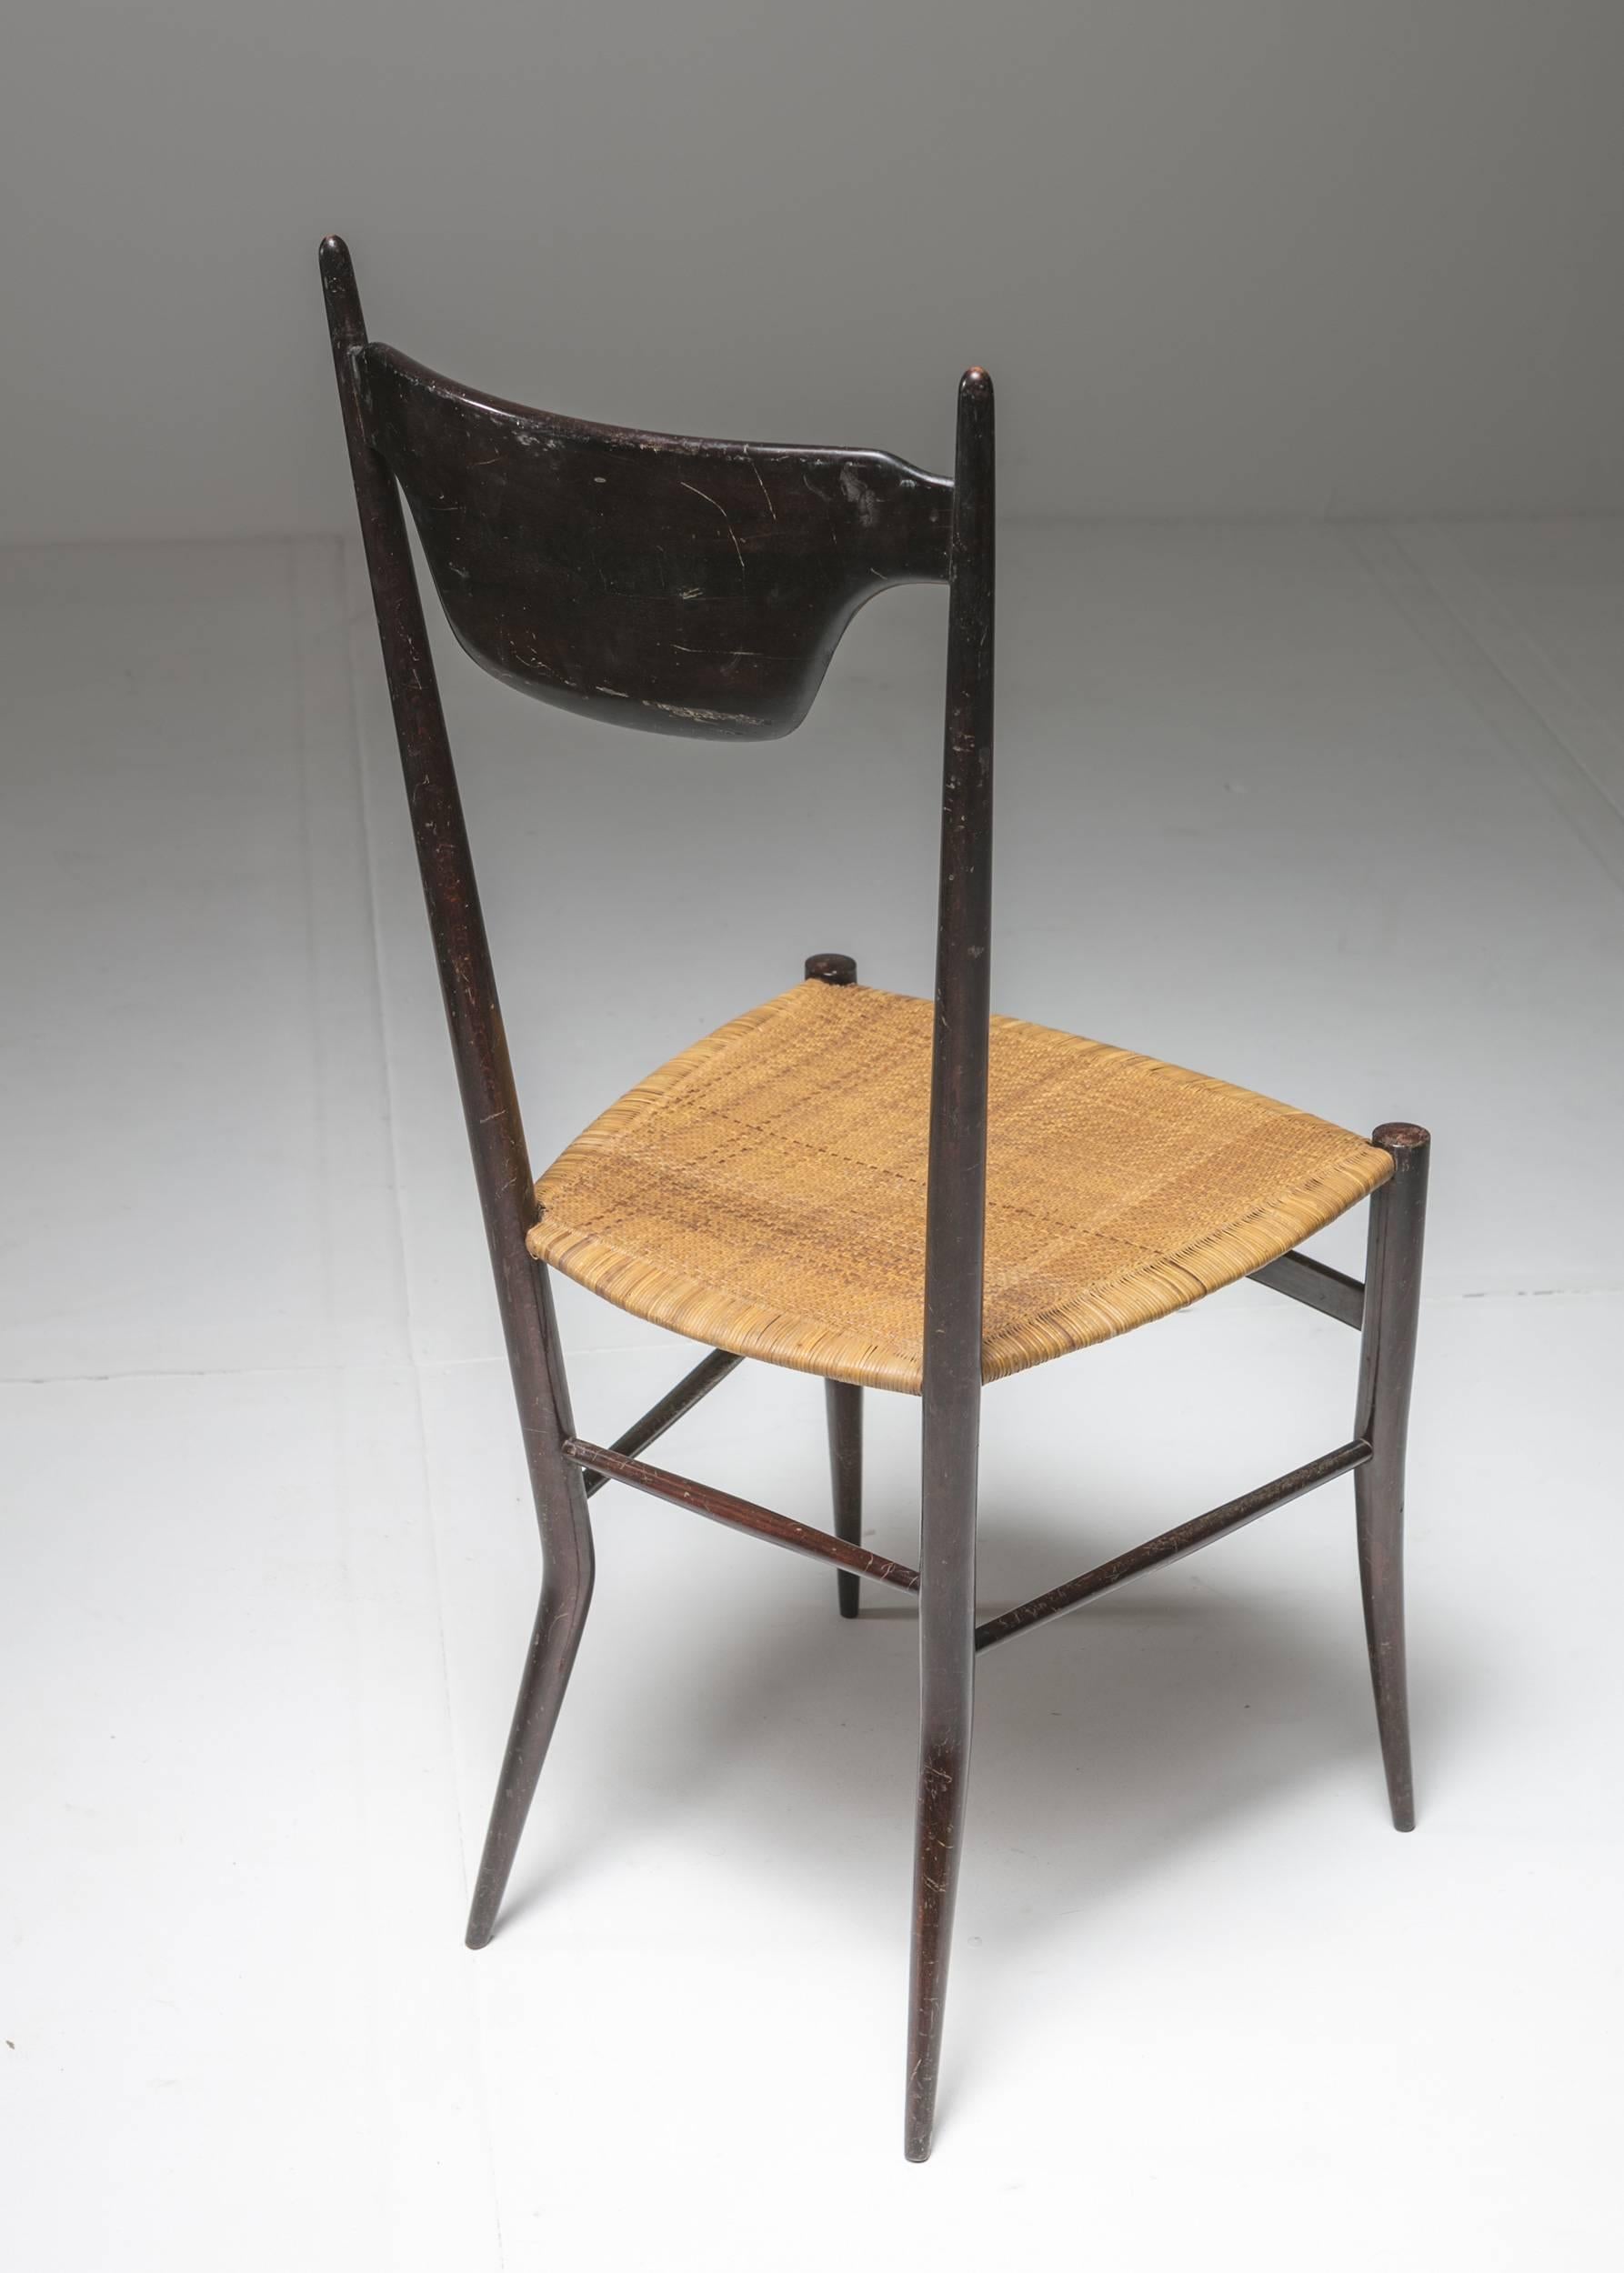 Mid-20th Century High Back Chiavari Chair by Sanguineti for Colombo